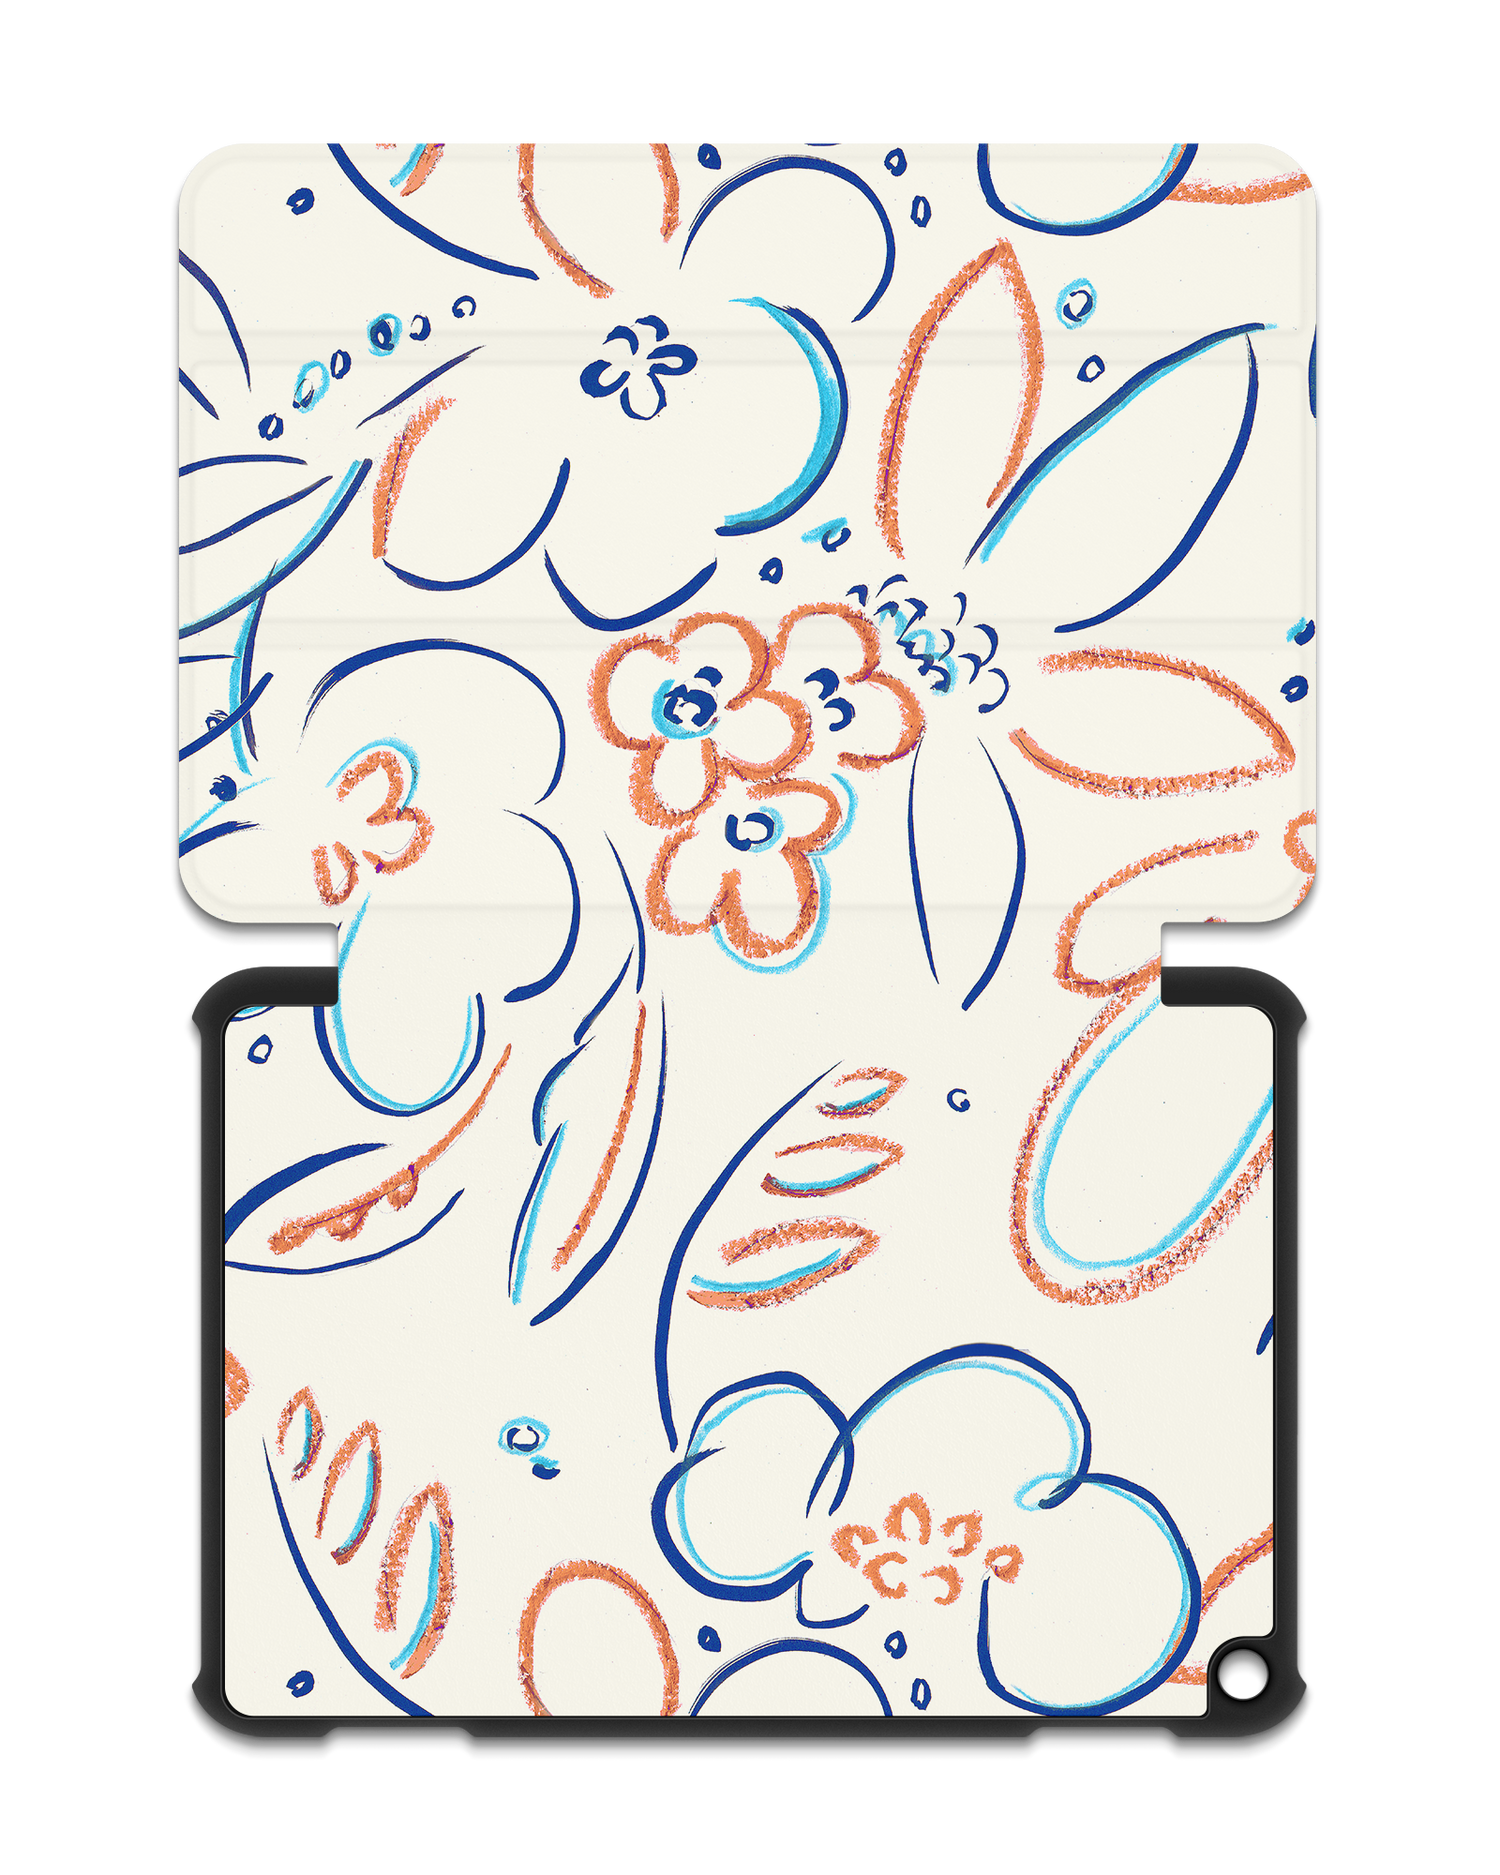 Bloom Doodles Tablet Smart Case for Amazon Fire HD 8 (2022), Amazon Fire HD 8 Plus (2022), Amazon Fire HD 8 (2020), Amazon Fire HD 8 Plus (2020): Opened